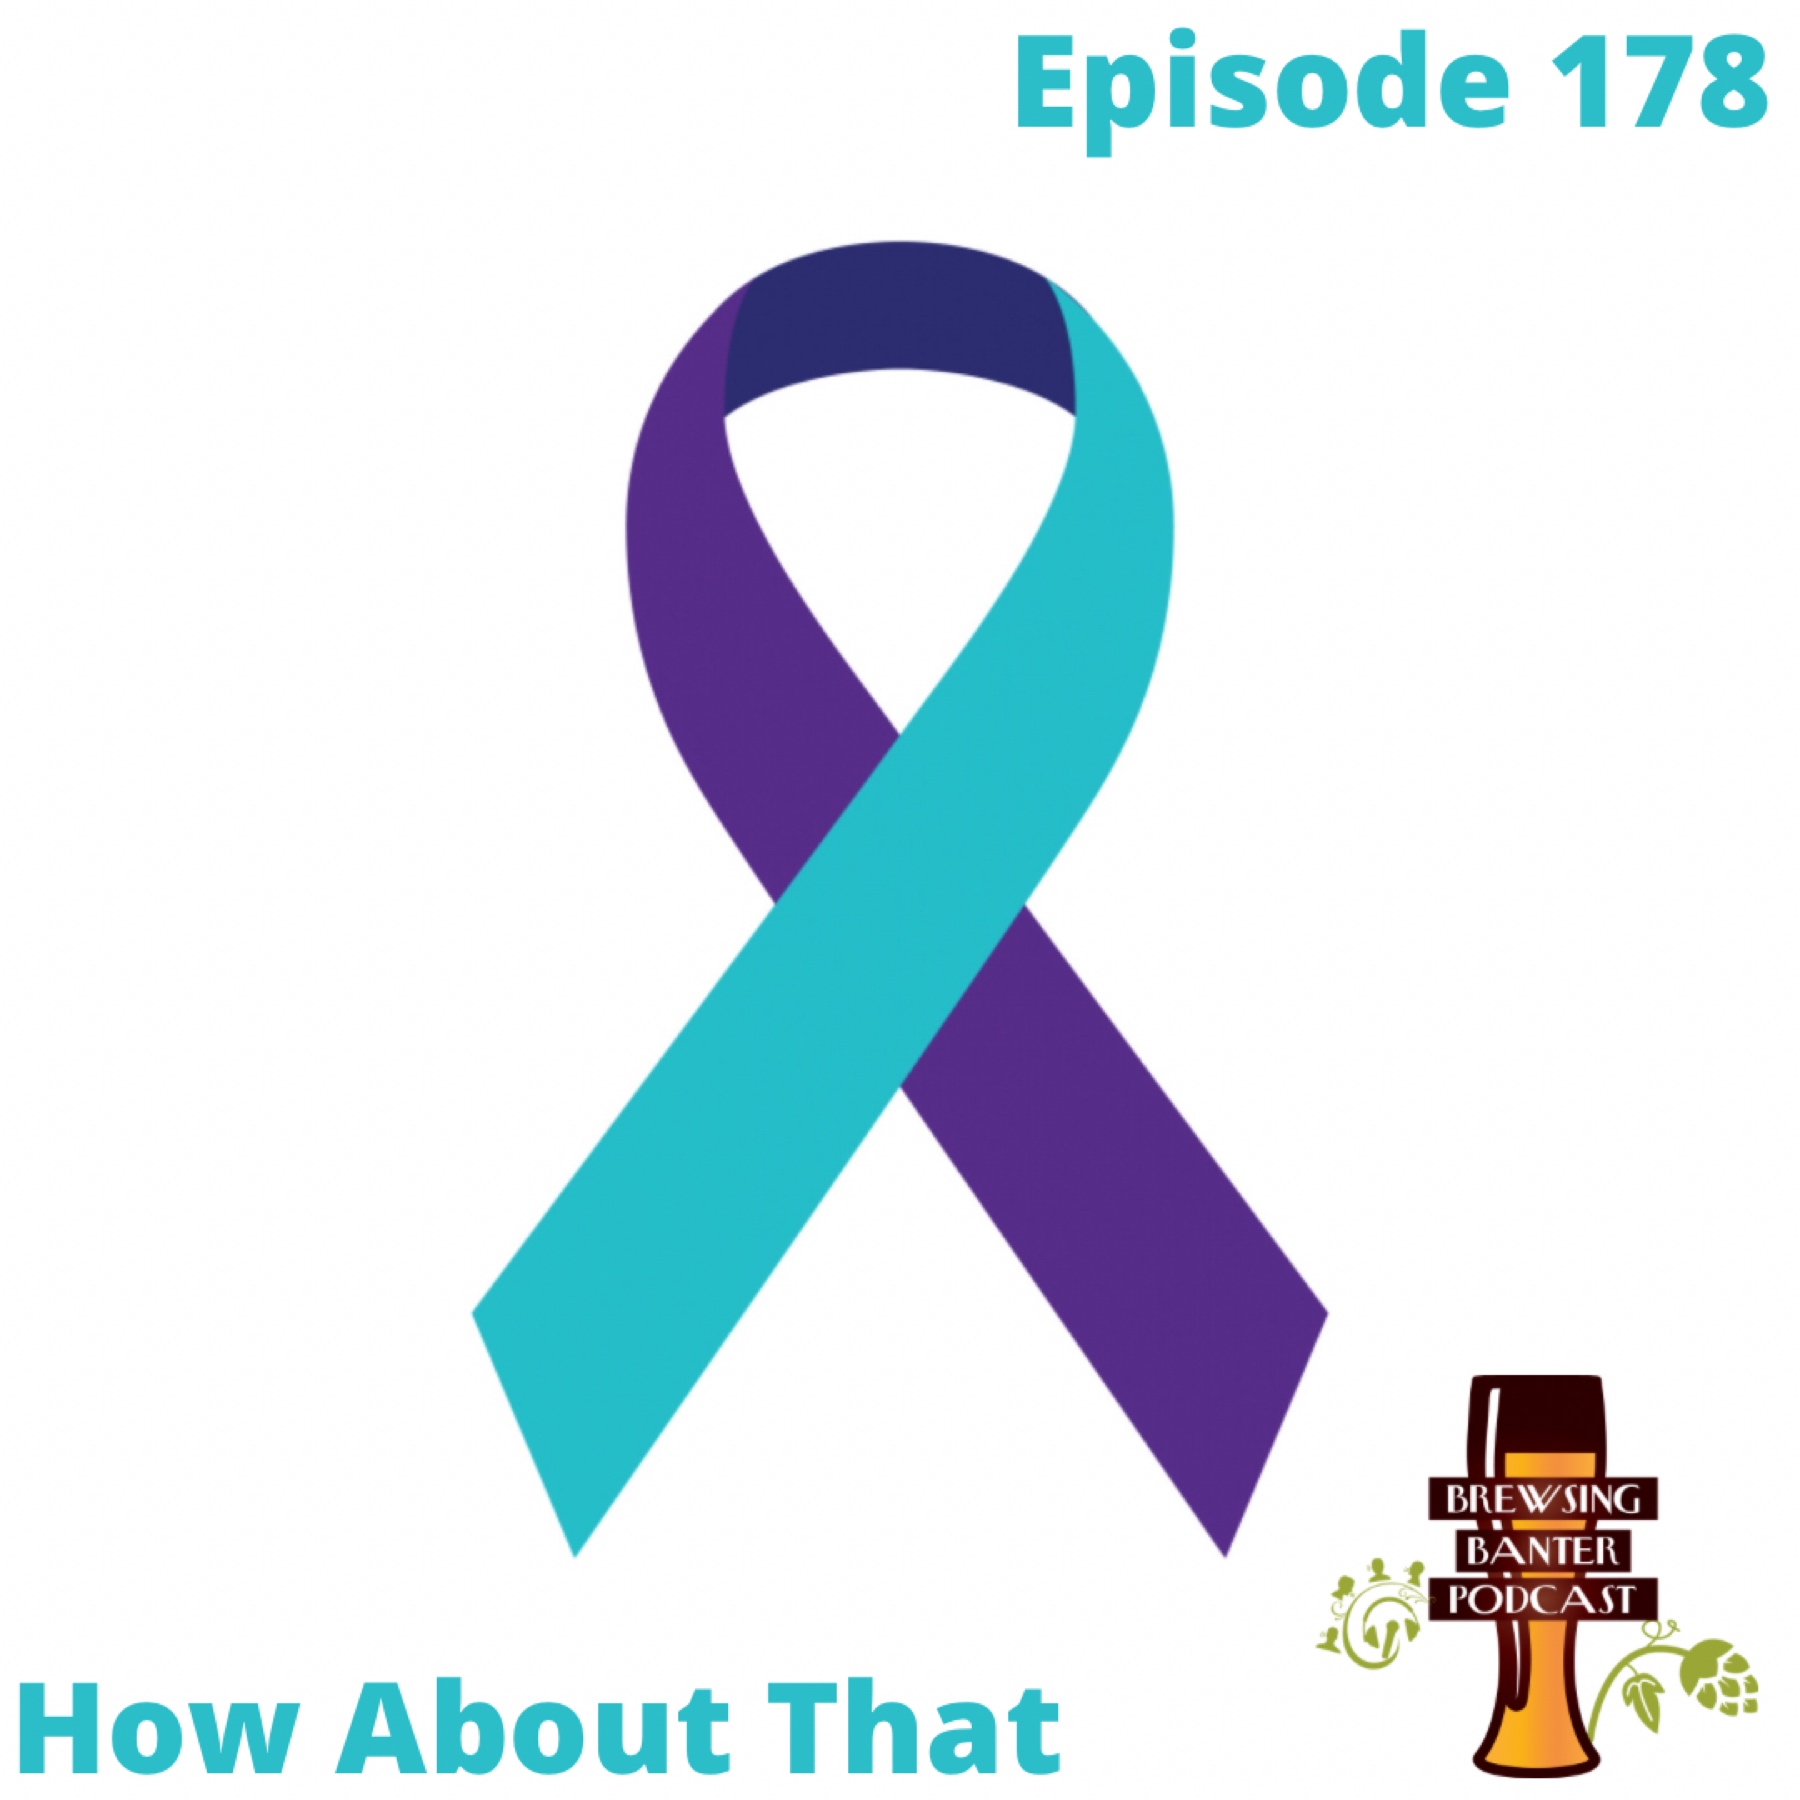 BBP 178 - How About That Image